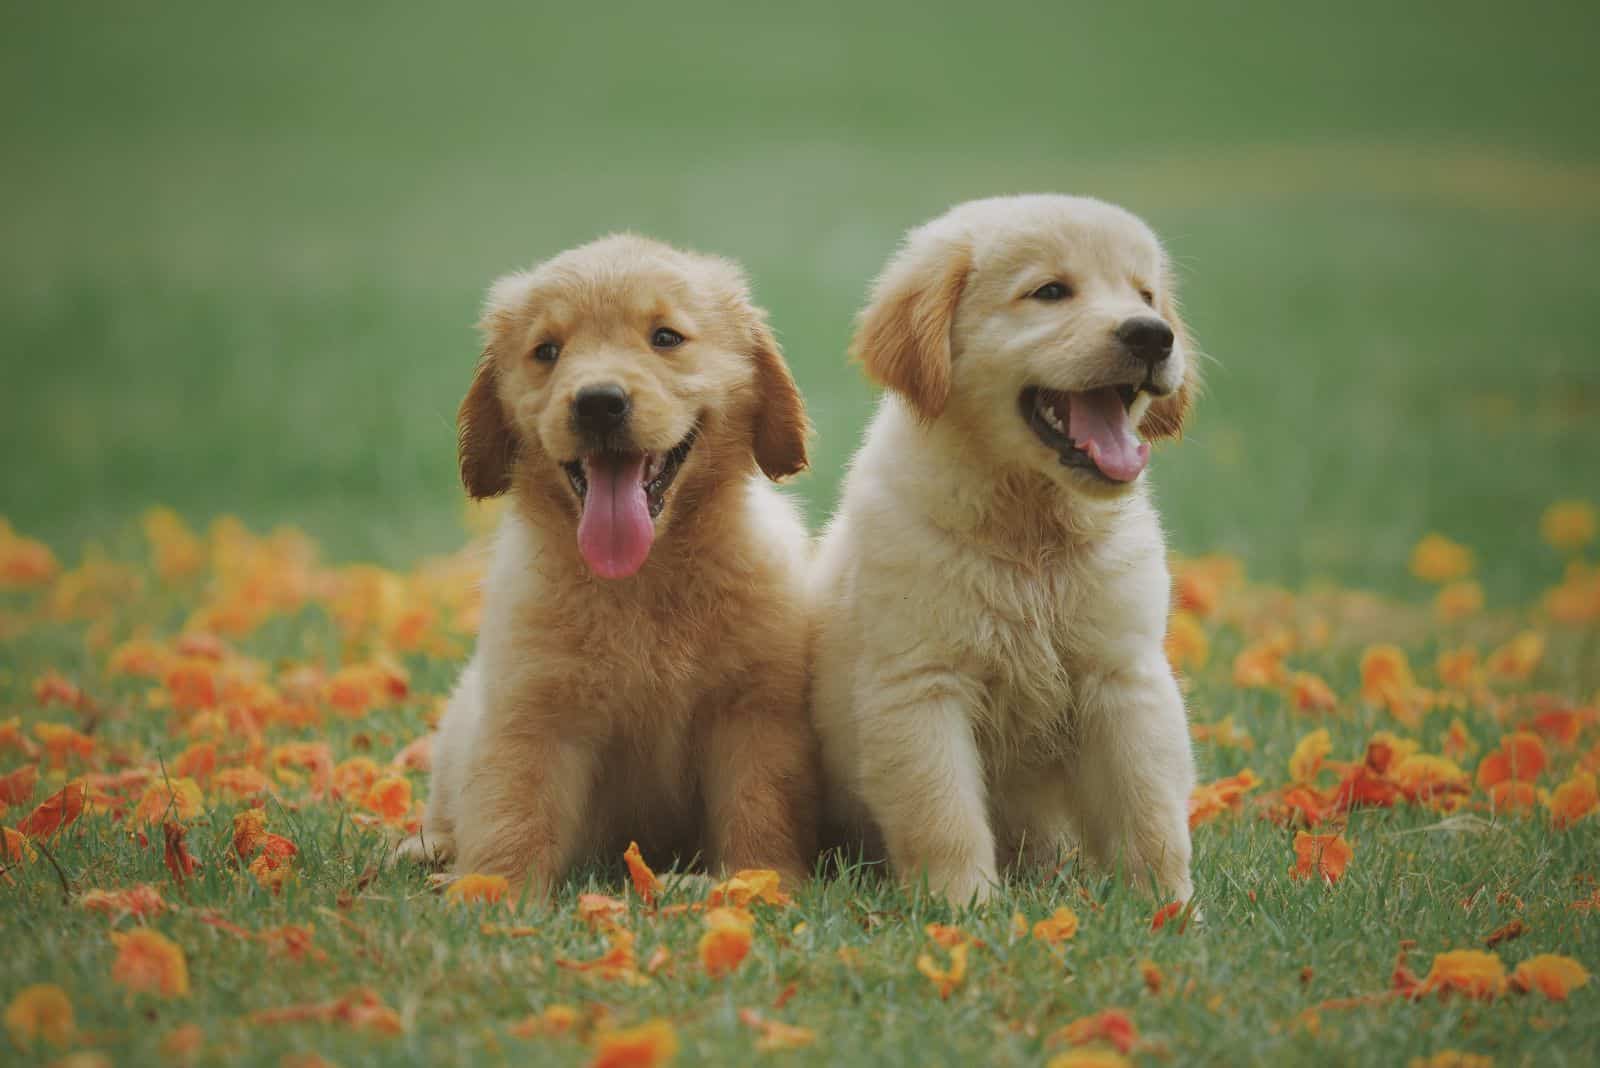 cute two Golden Retriever puppies sitting on the grass